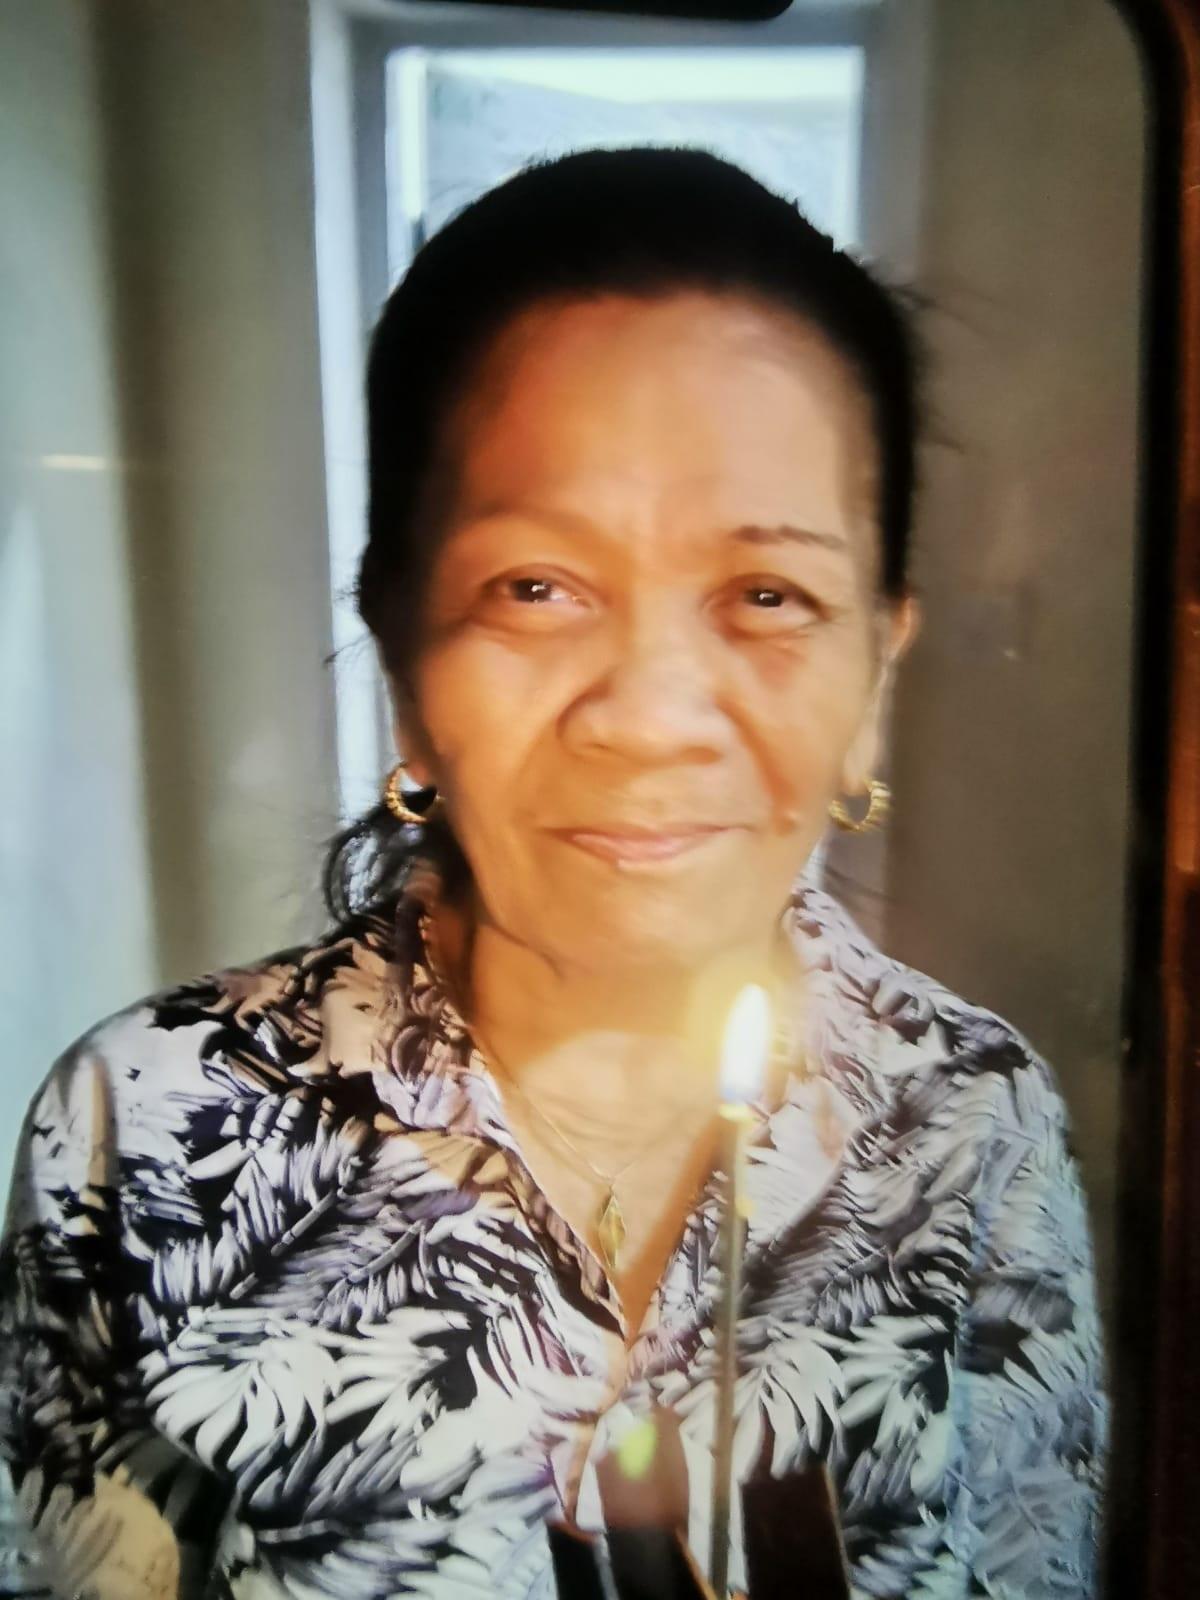 Wong Leticia M, a foreign woman aged 76, is about 1.5 metres tall, 45 kilograms in weight and of thin build. She has a long face with yellow complexion and long black hair. She was last seen wearing an orange-red short-sleeved shirt, a dark-coloured skirt, black shoes and carrying a white handbag. 